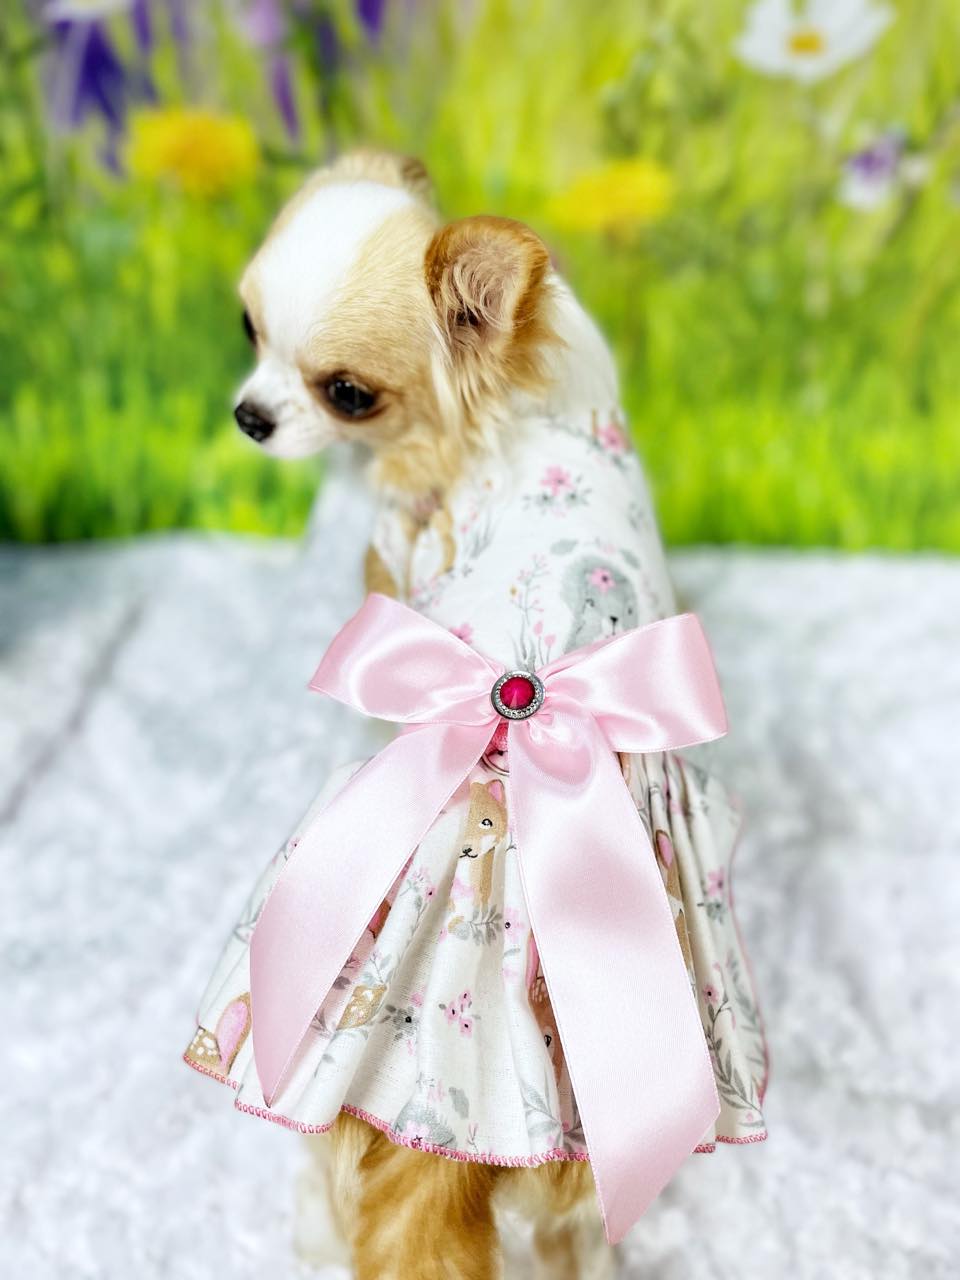 Woodland Nursery Flannel Pet Dress with Removable Bow - Machine Washable, Adorable Animal Print